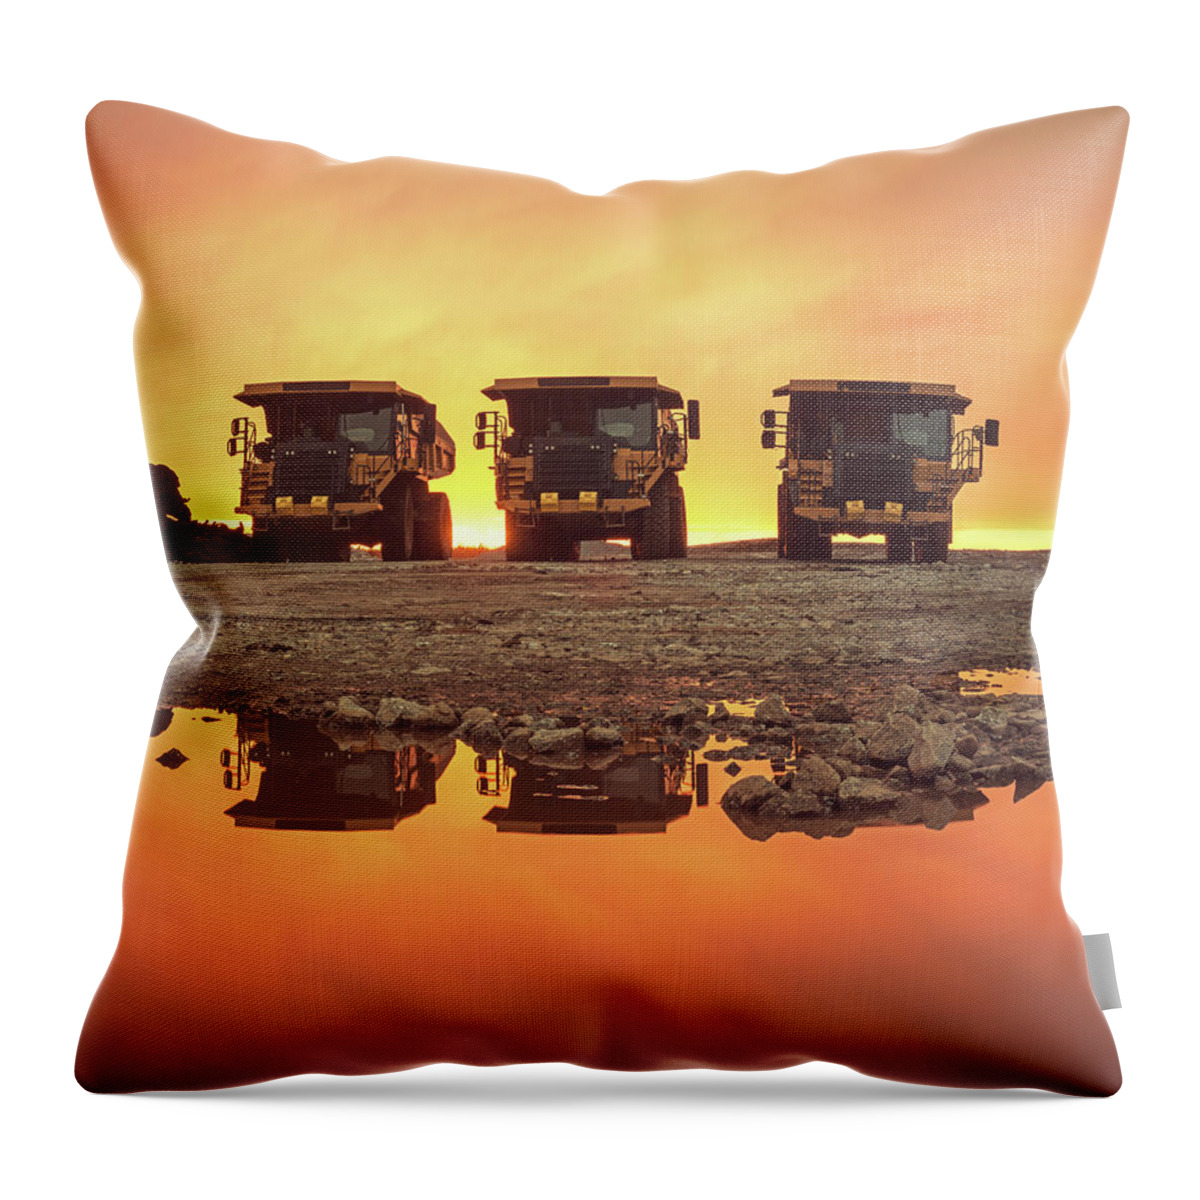 Construction Site Throw Pillow featuring the photograph Trio Of Trucks by Shaunl